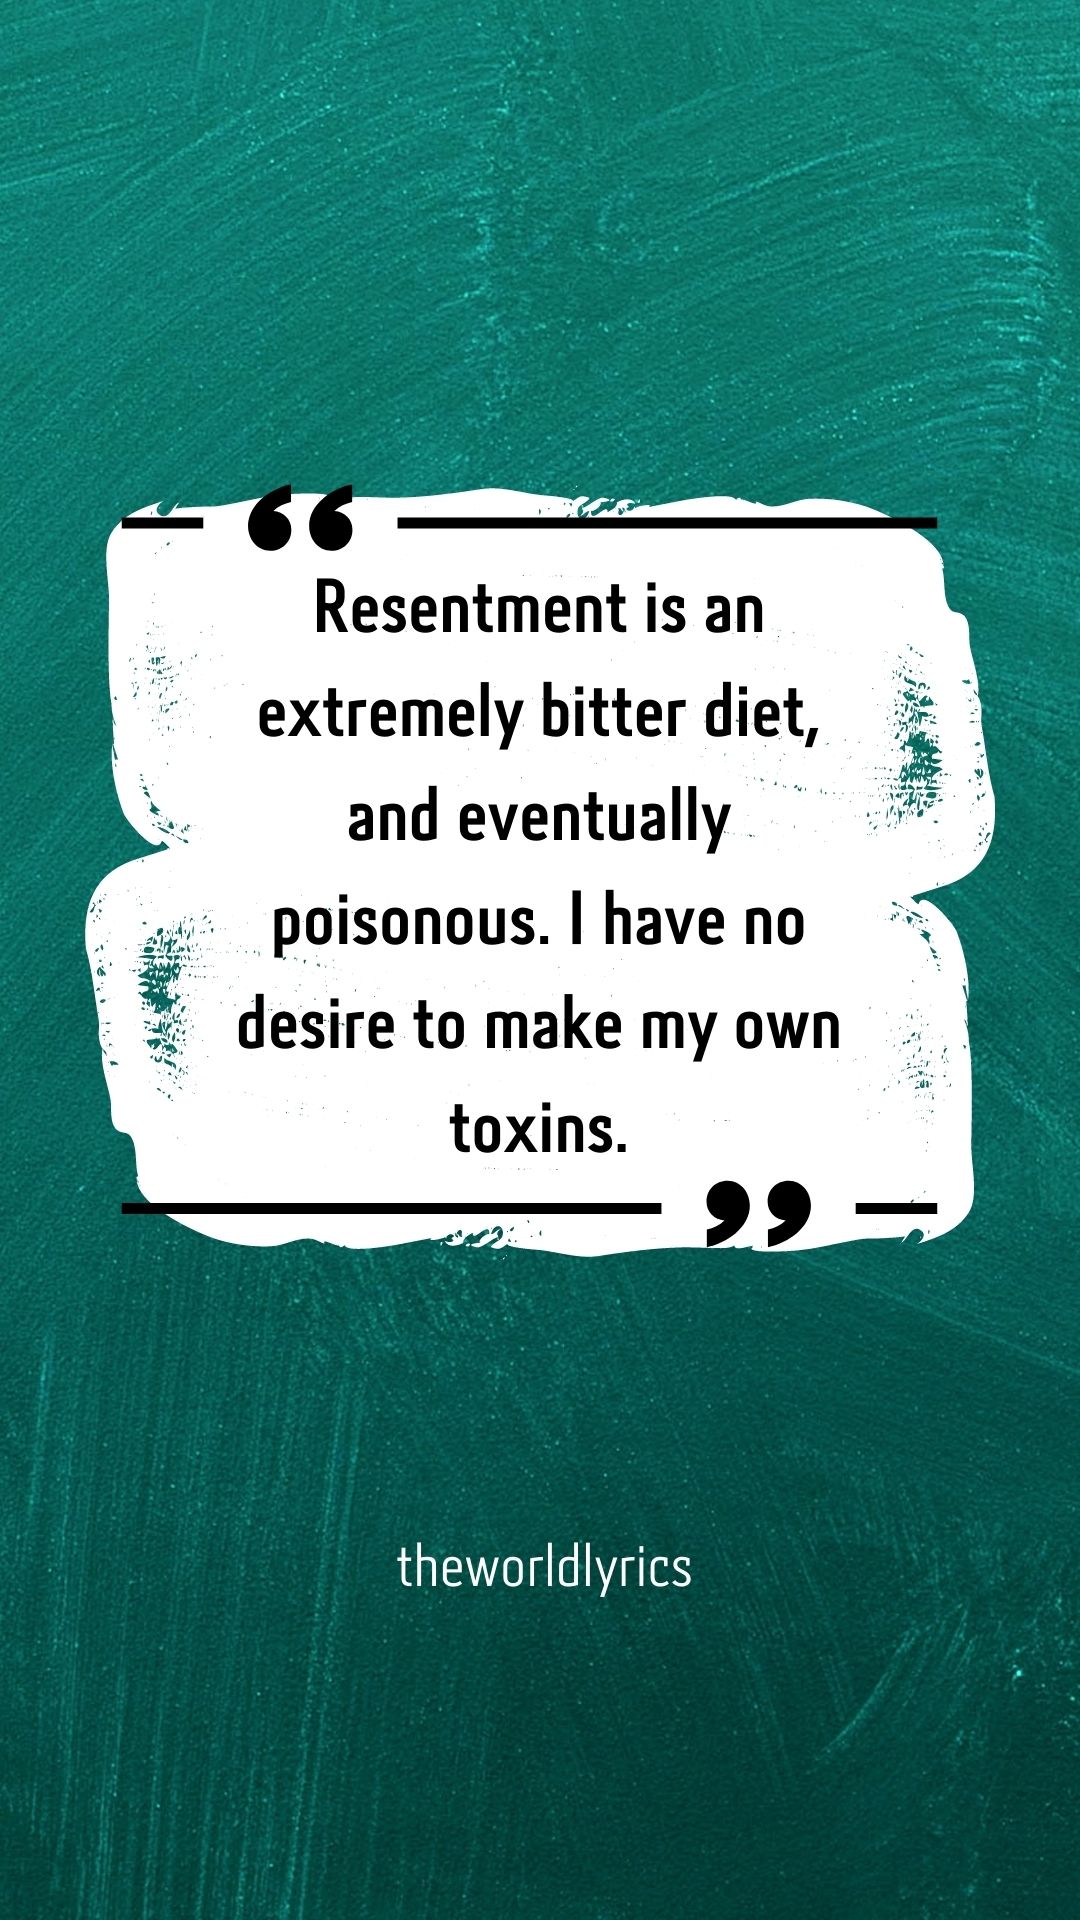 Resentment is an extremely bitter diet and eventually poisonous. I have no desire to make my own toxins